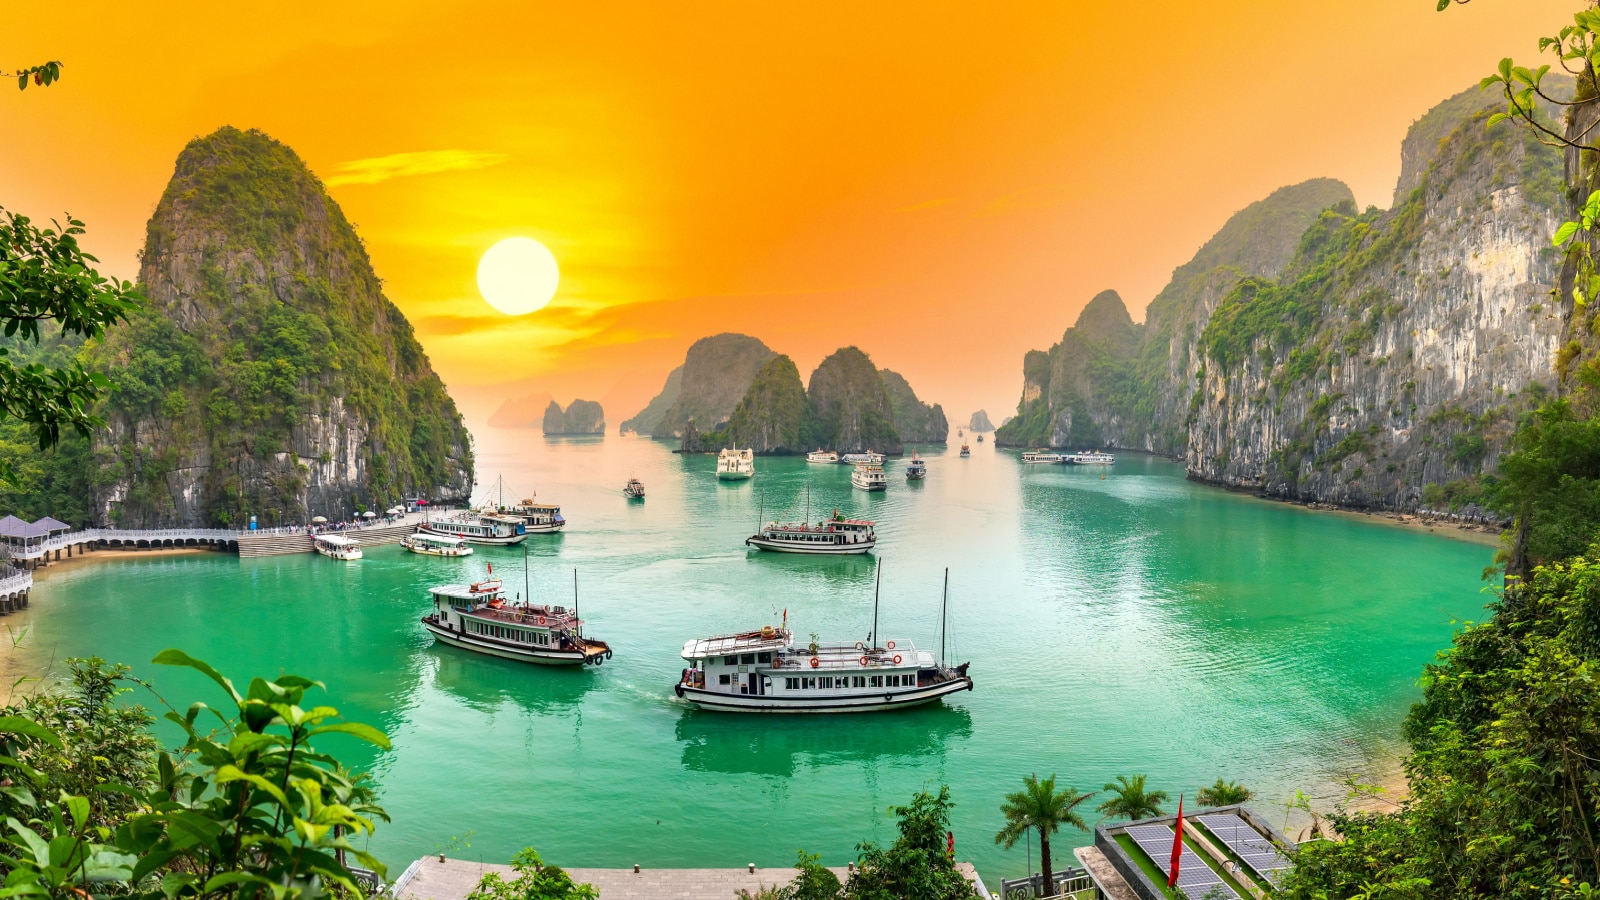 Dreamy sunset landscape Halong Bay, Vietnam view from adove. This is the UNESCO World Heritage Site, a beautiful natural wonder in northern Vietnam